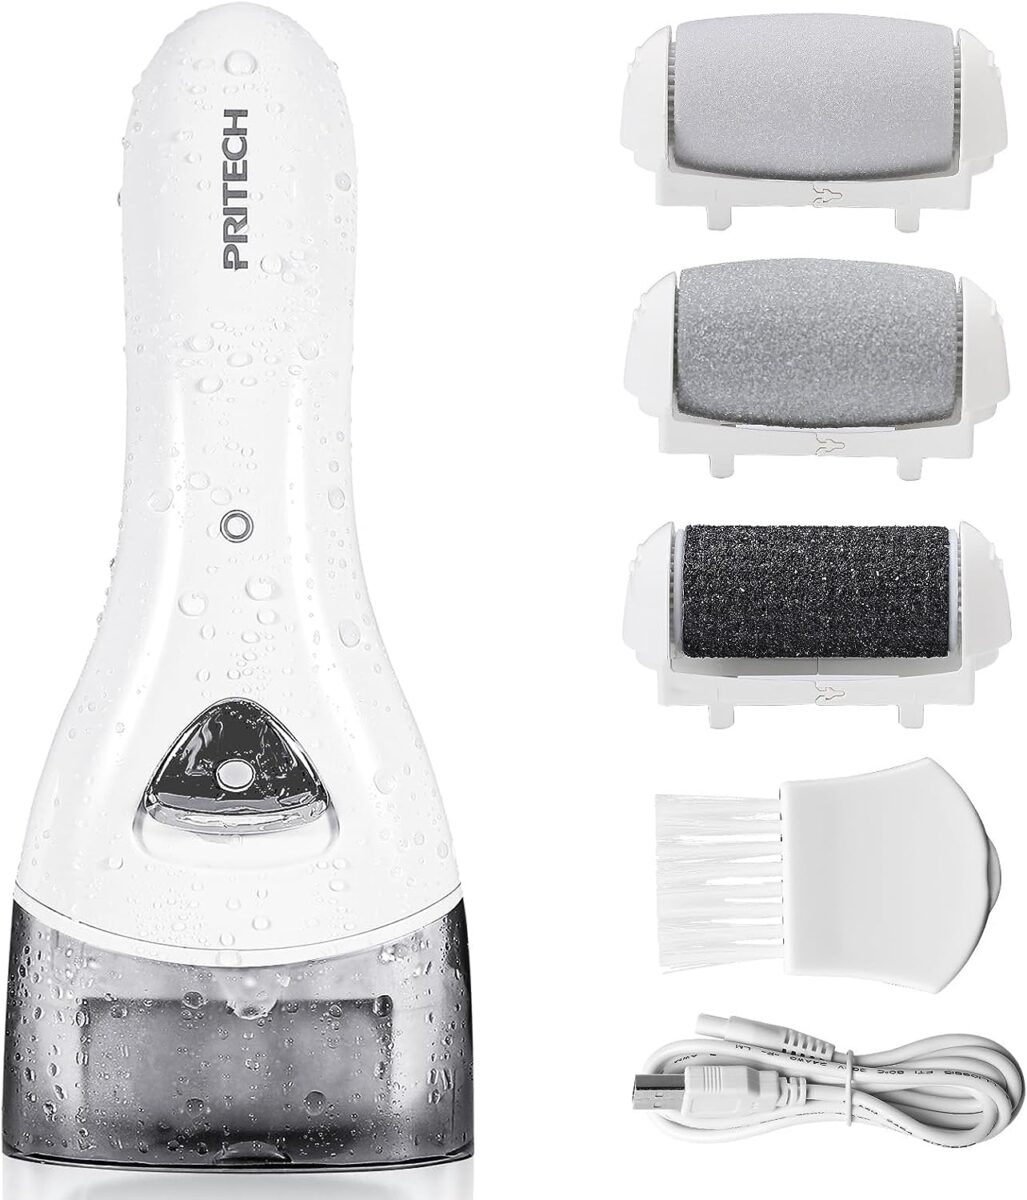 Pritech Electric Feet Callus Removers Rechargeable